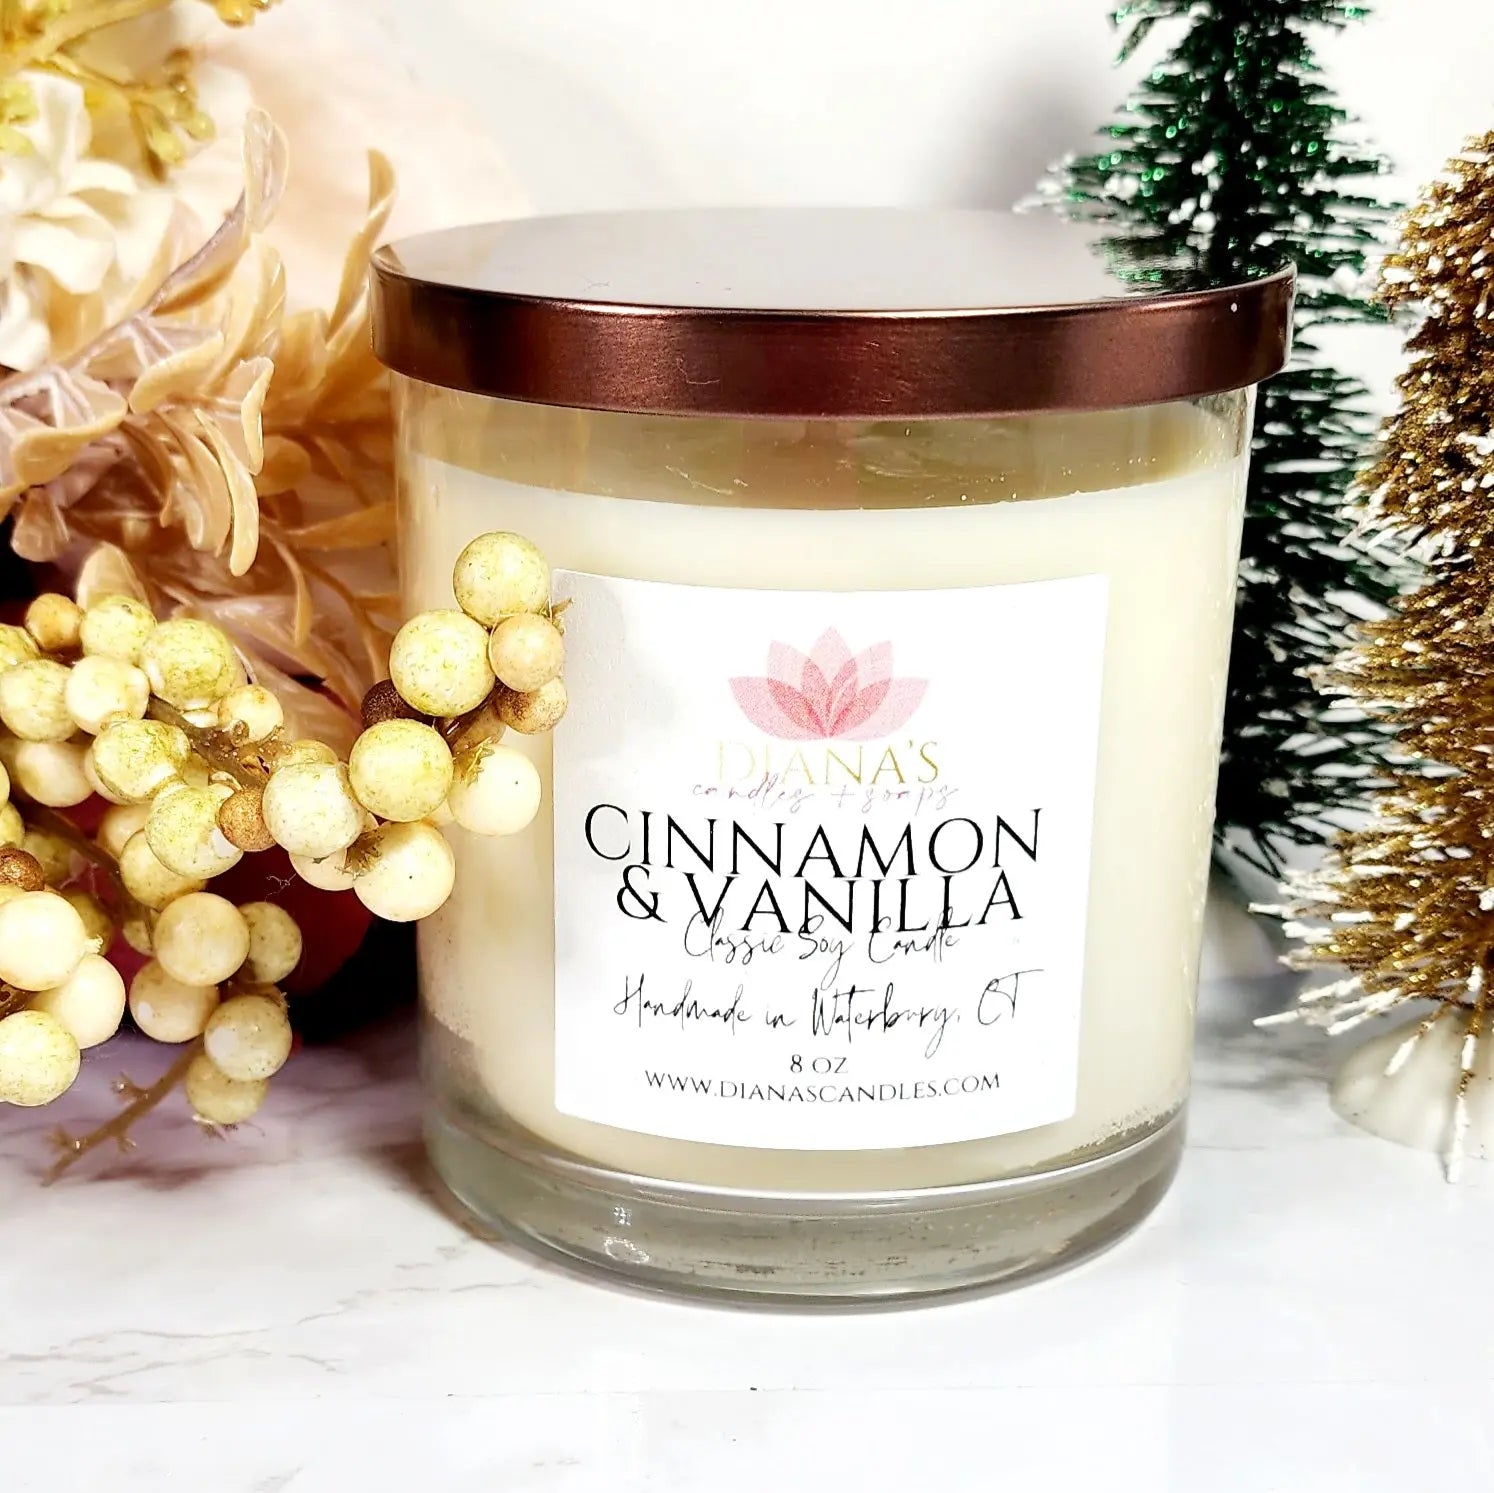 Cinnamon and Vanilla Candle - Diana's Candles and Soaps 